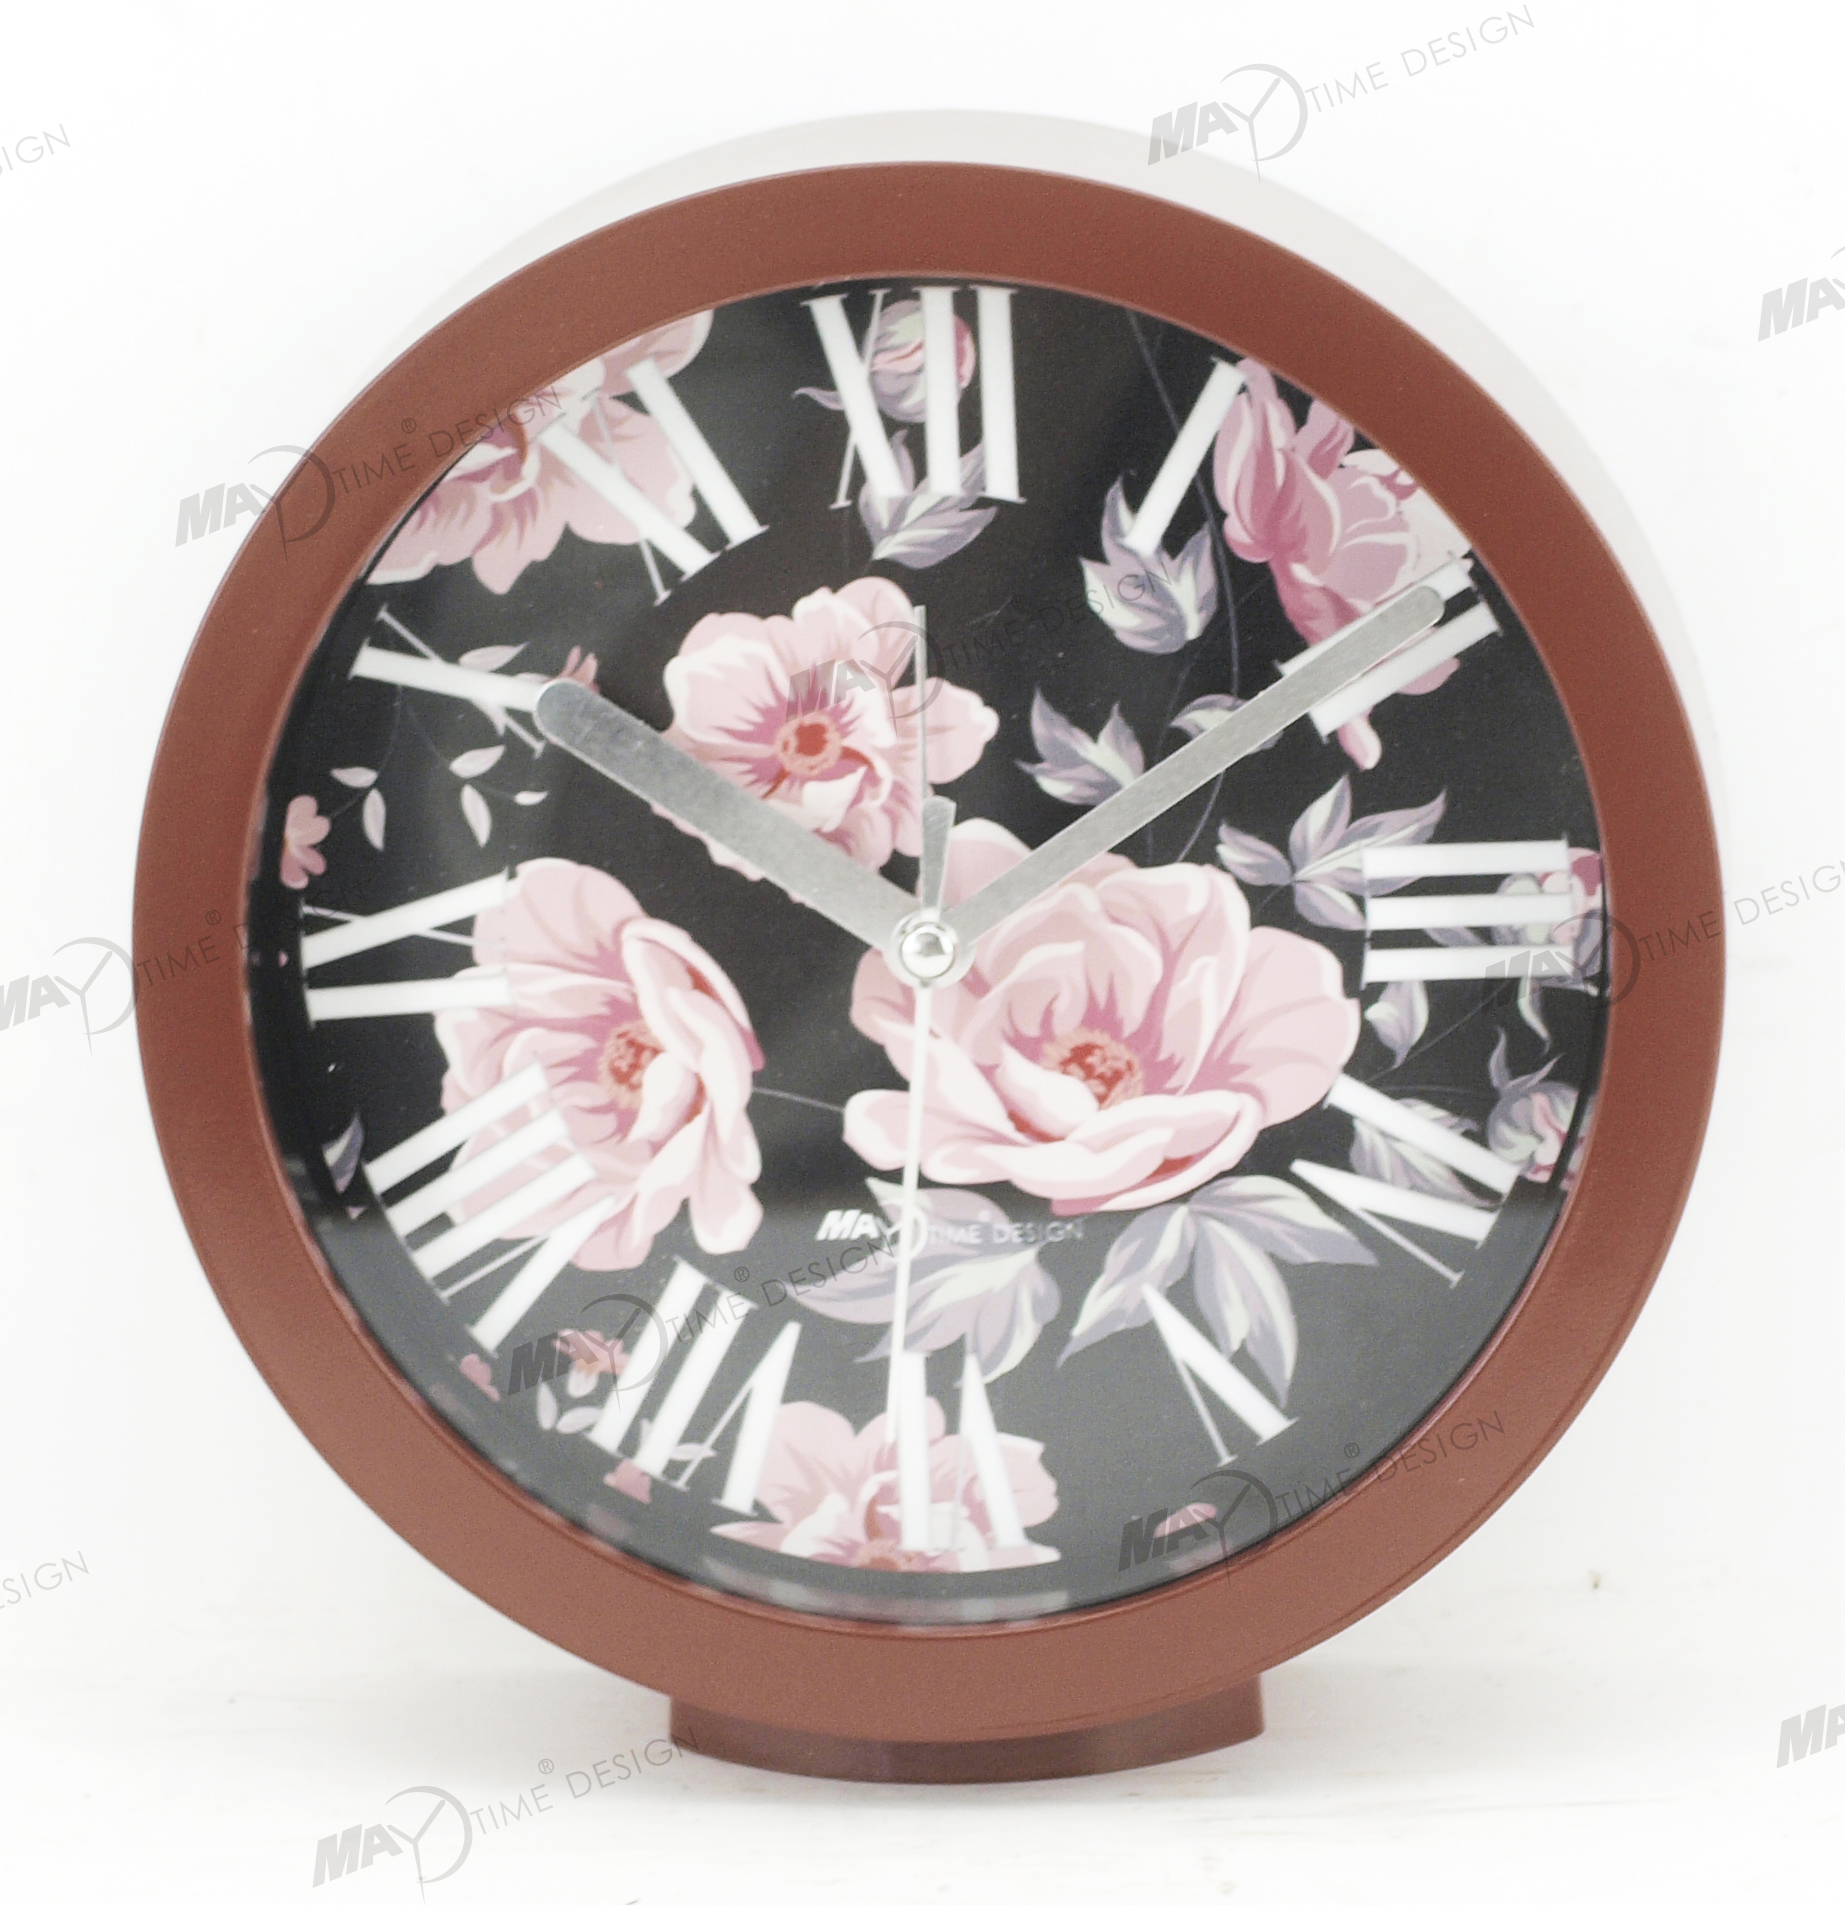 The Fascinating World of Decor Wall Clocks: A Guide for Clock Enthusiasts